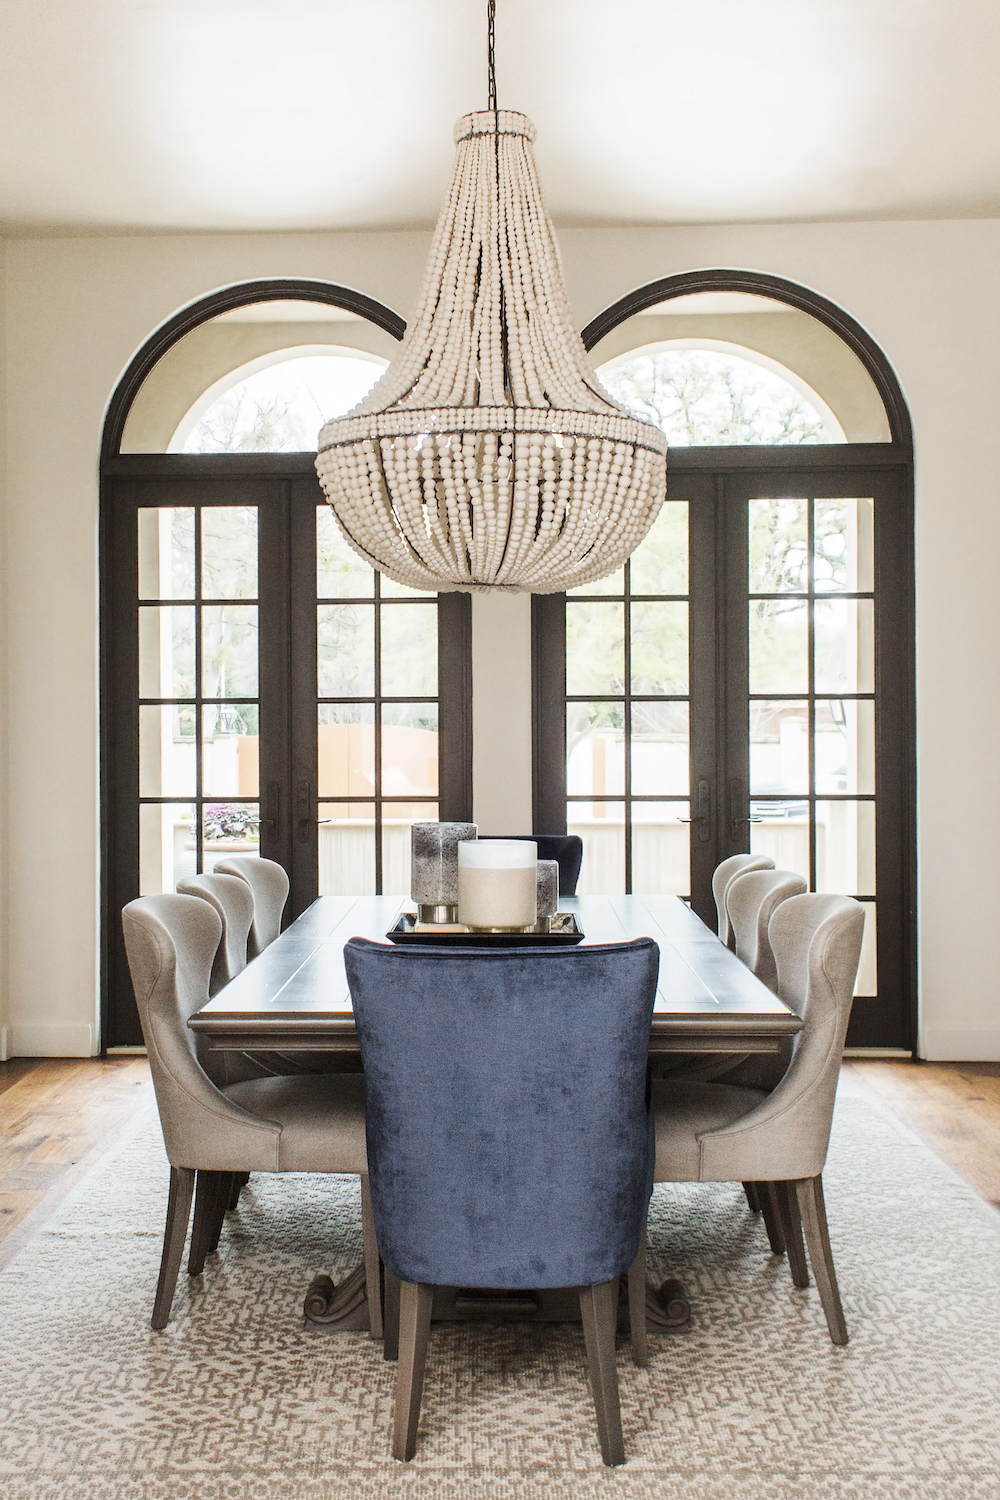 format dining room with chandelier